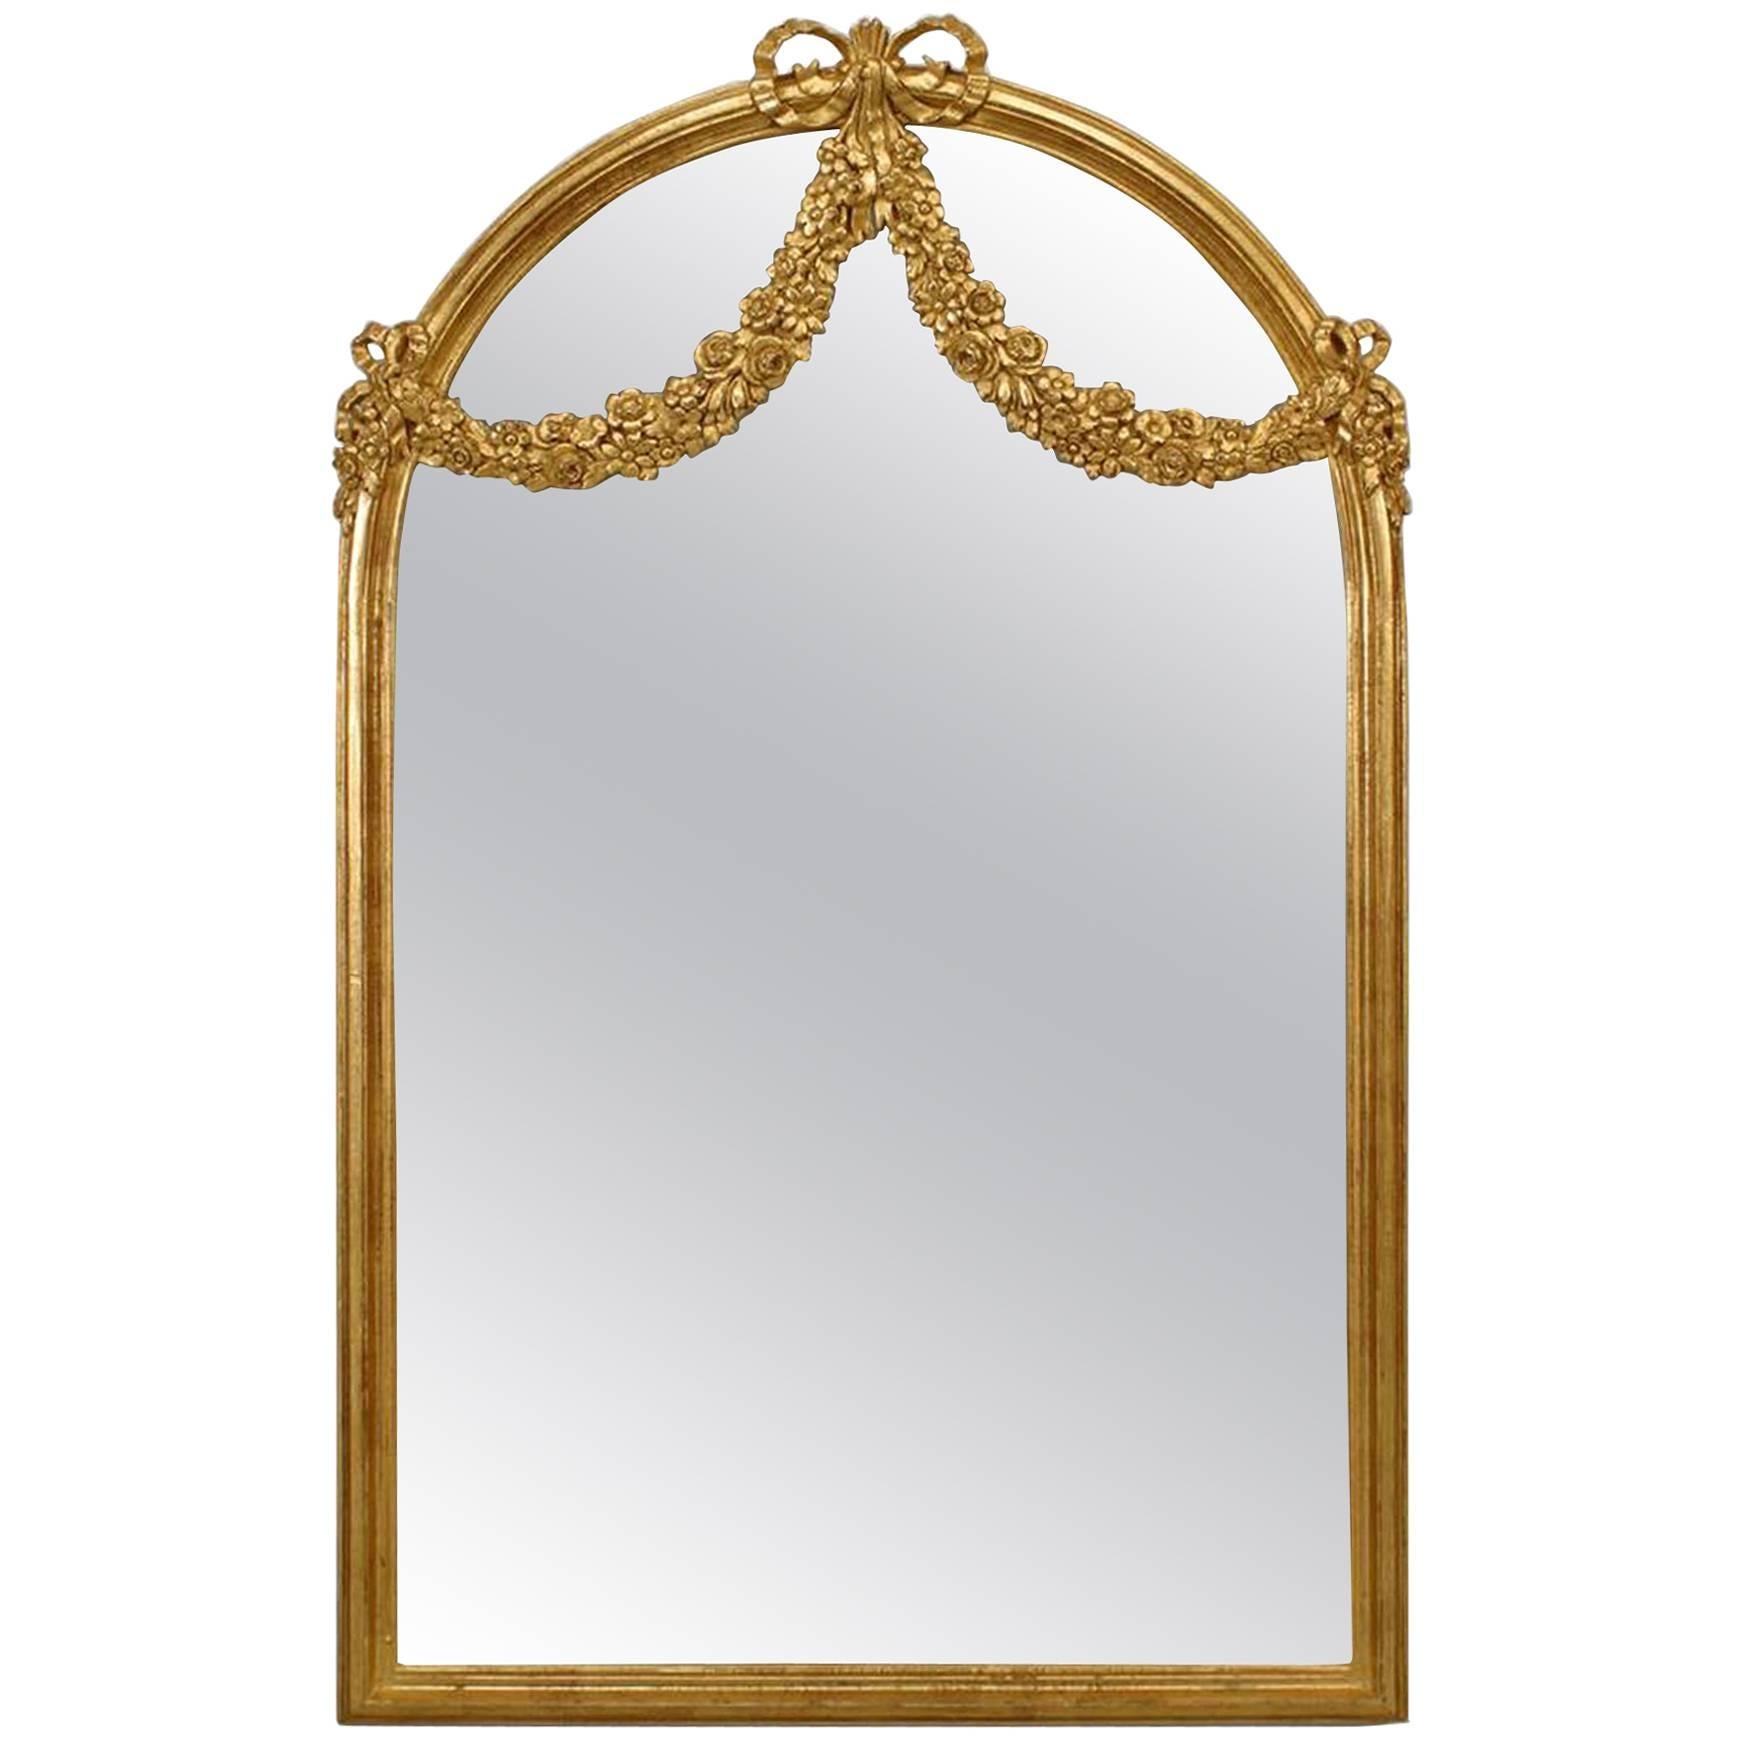 French Louis XVI Style Giltwood Swag Design Wall Mirror